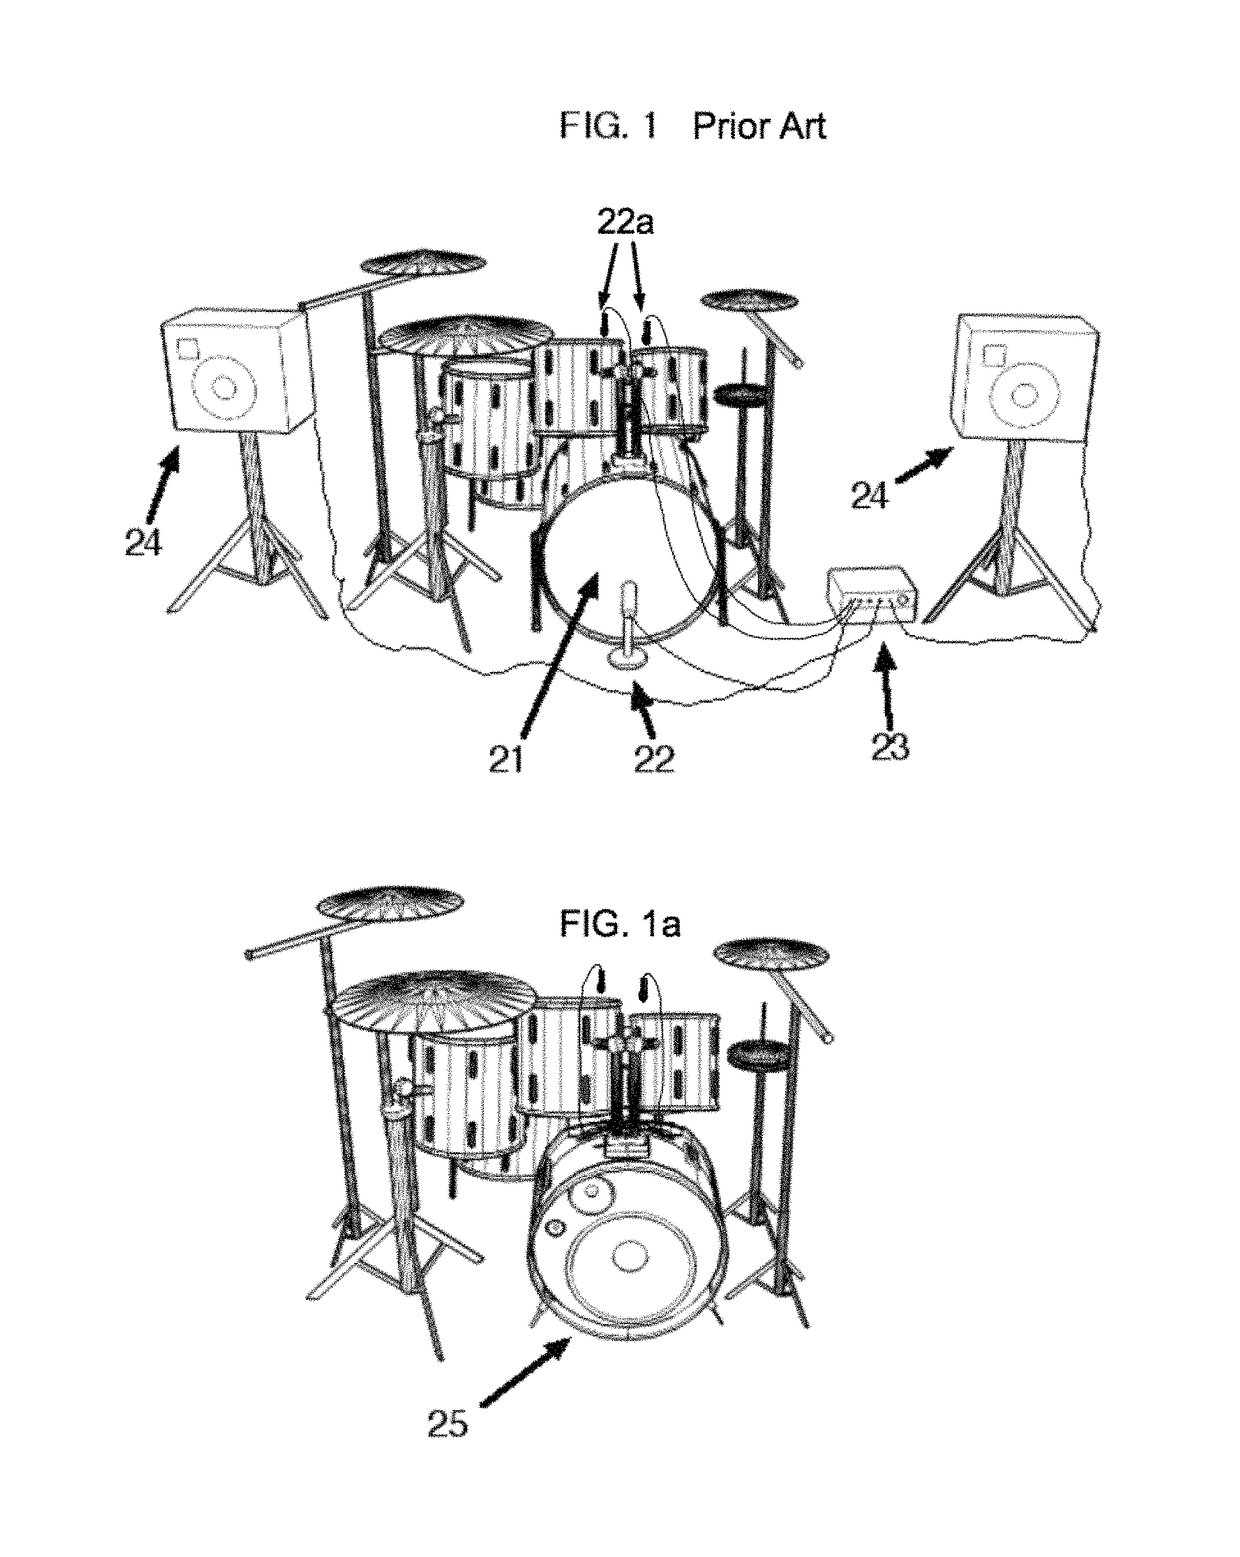 Acoustic-to-electronic bass drum conversion kit